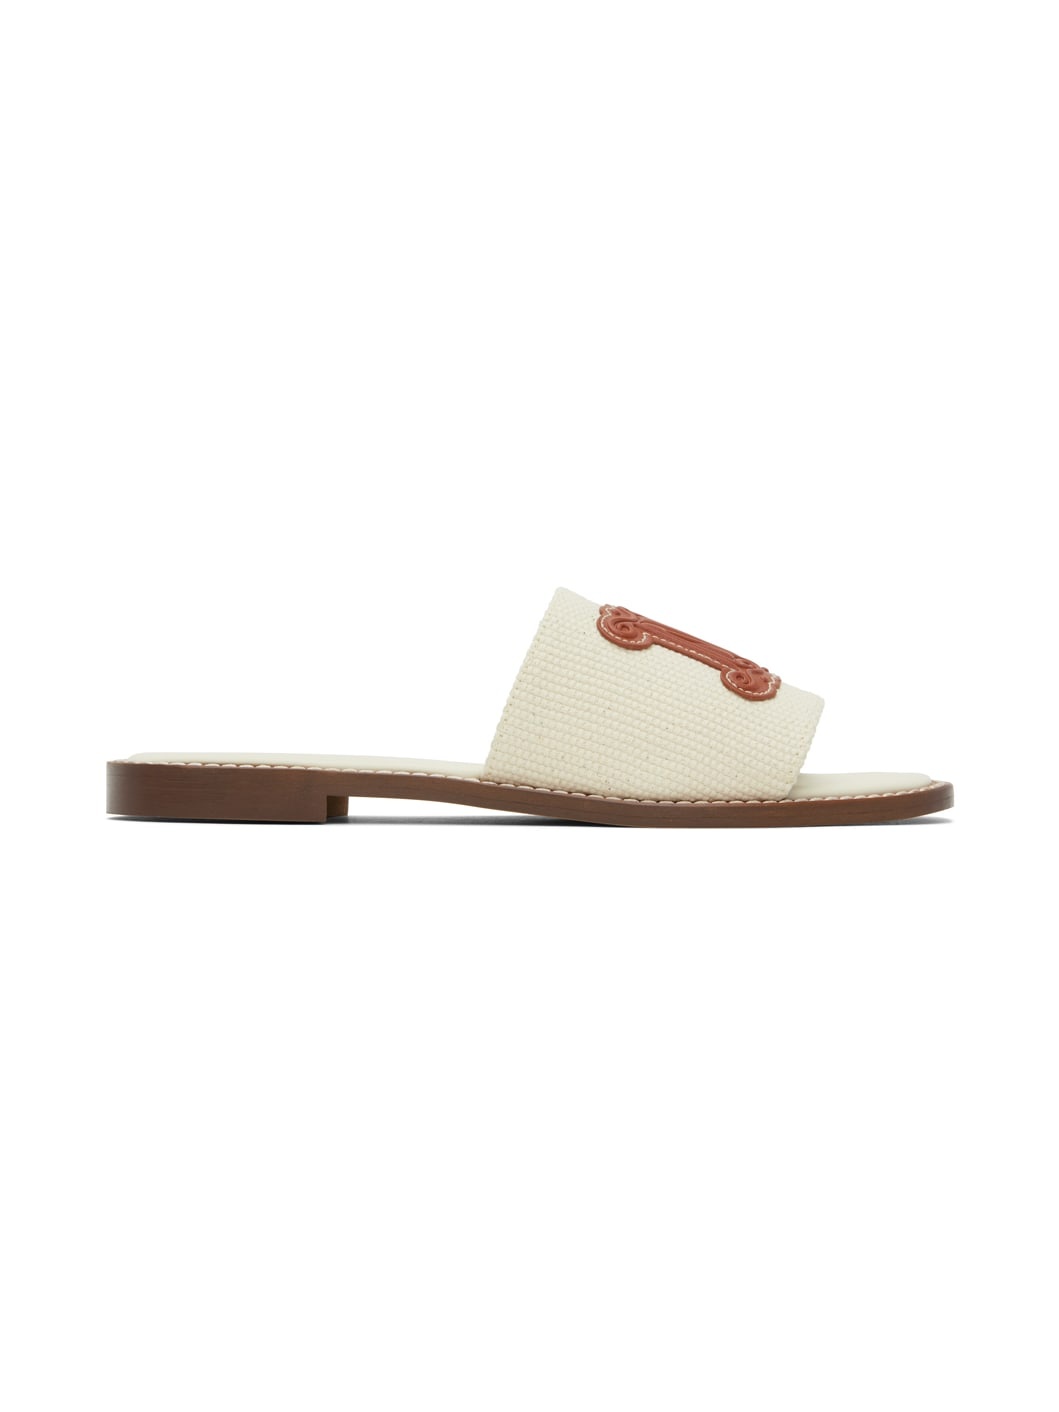 Off-White Geneve Sandals - 1